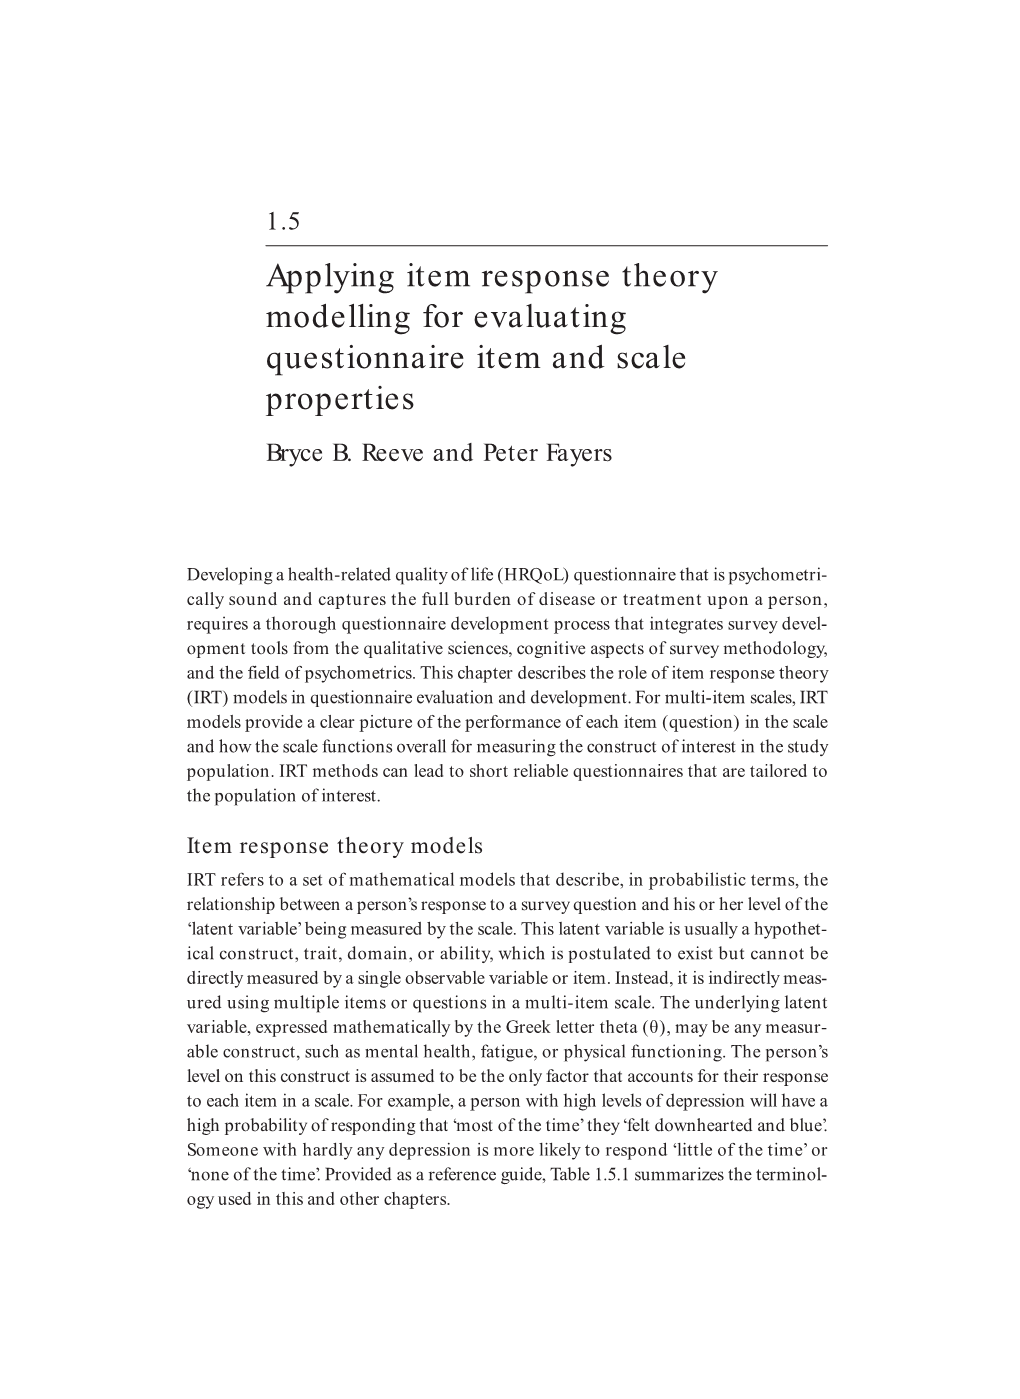 Applying Item Response Theory Modelling for Evaluating Questionnaire Item and Scale Properties Bryce B